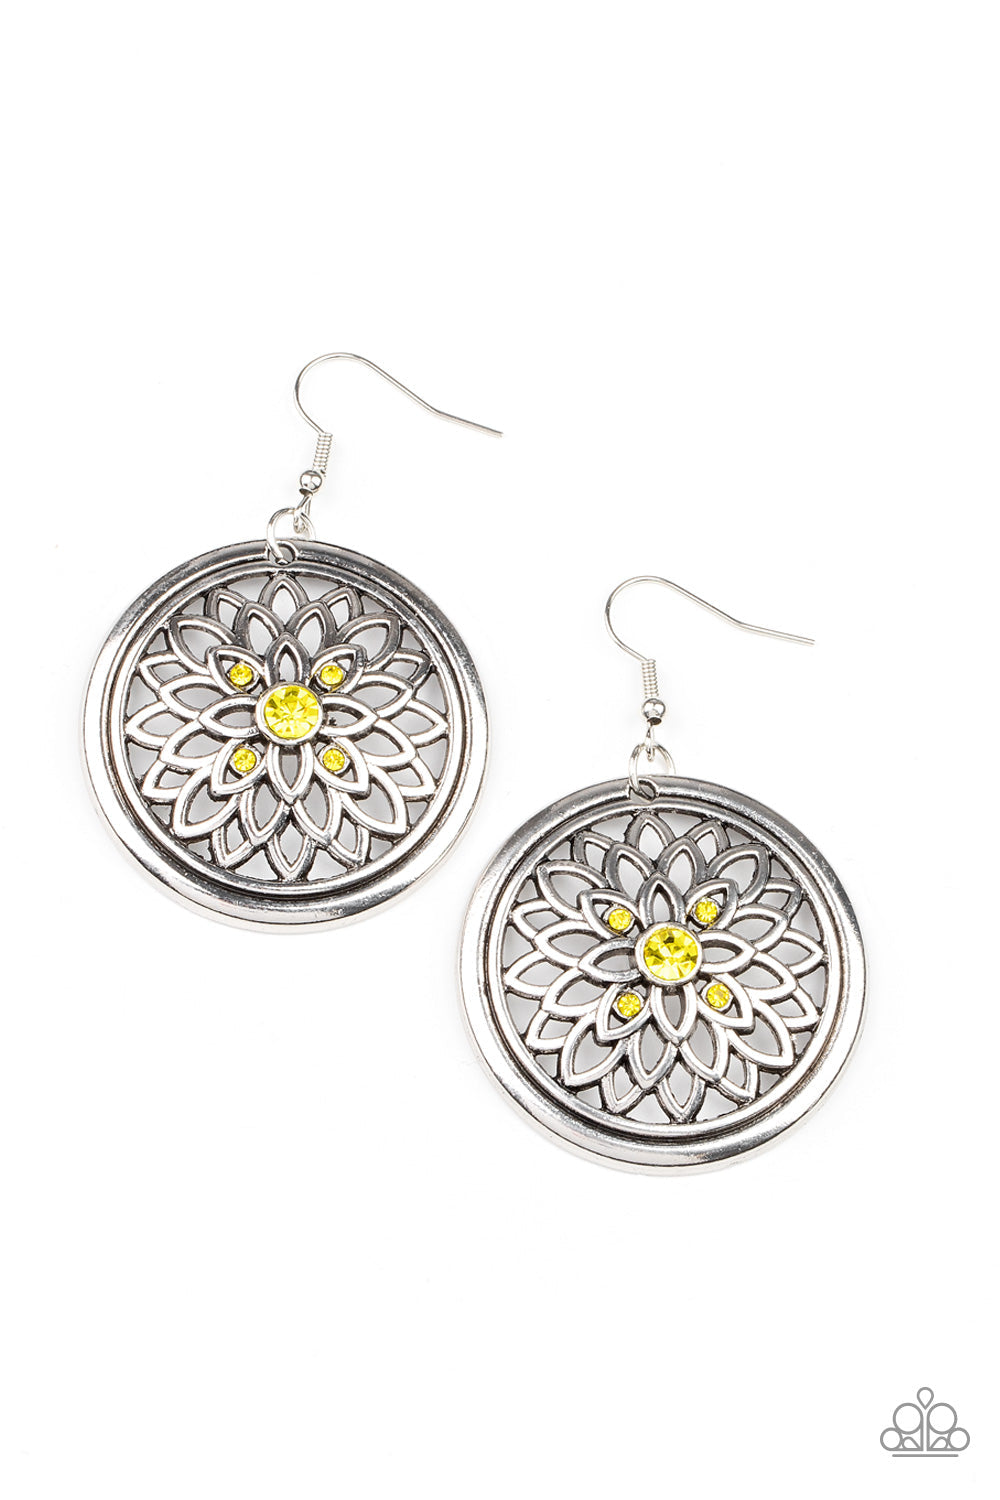 Mega Medallions - Yellow and Silver Earrings - Paparazzi Accessories - Dotted with a glittery yellow rhinestone center, airy silver petals bloom across the front of a rustic silver hoop, creating a sparkly medallion-like frame. Earring attaches to a standard fishhook fitting. Sold as one pair of earrings.